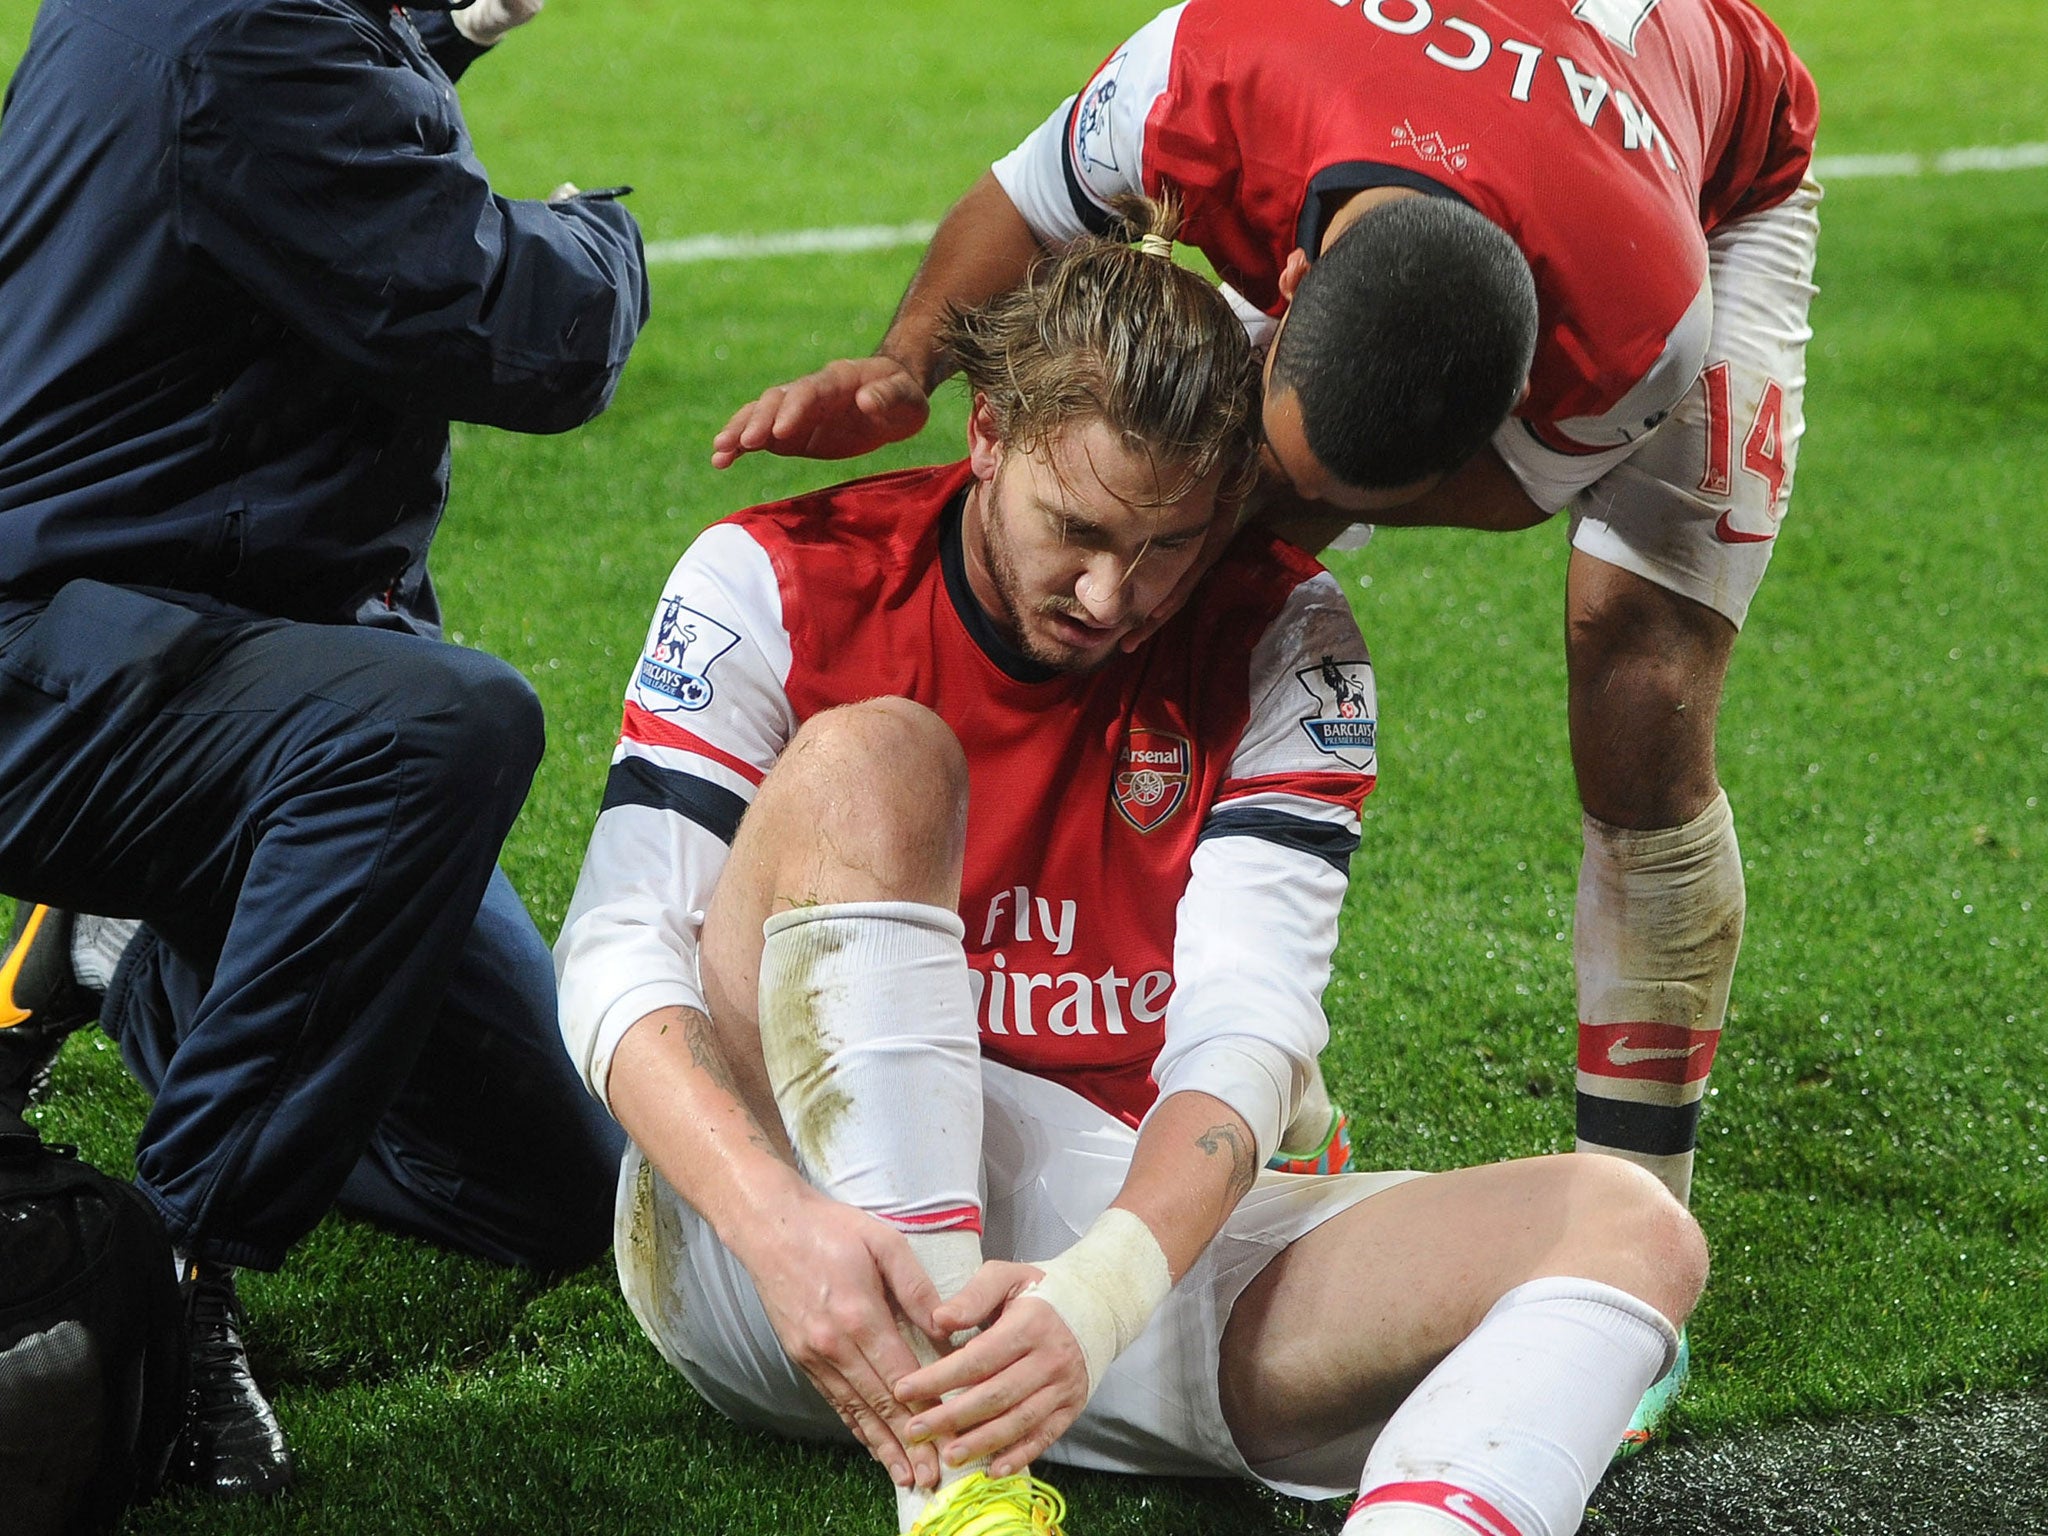 Nicklas Bendtner goes down holding his ankle after scoring and is consoled by Theo Walcott